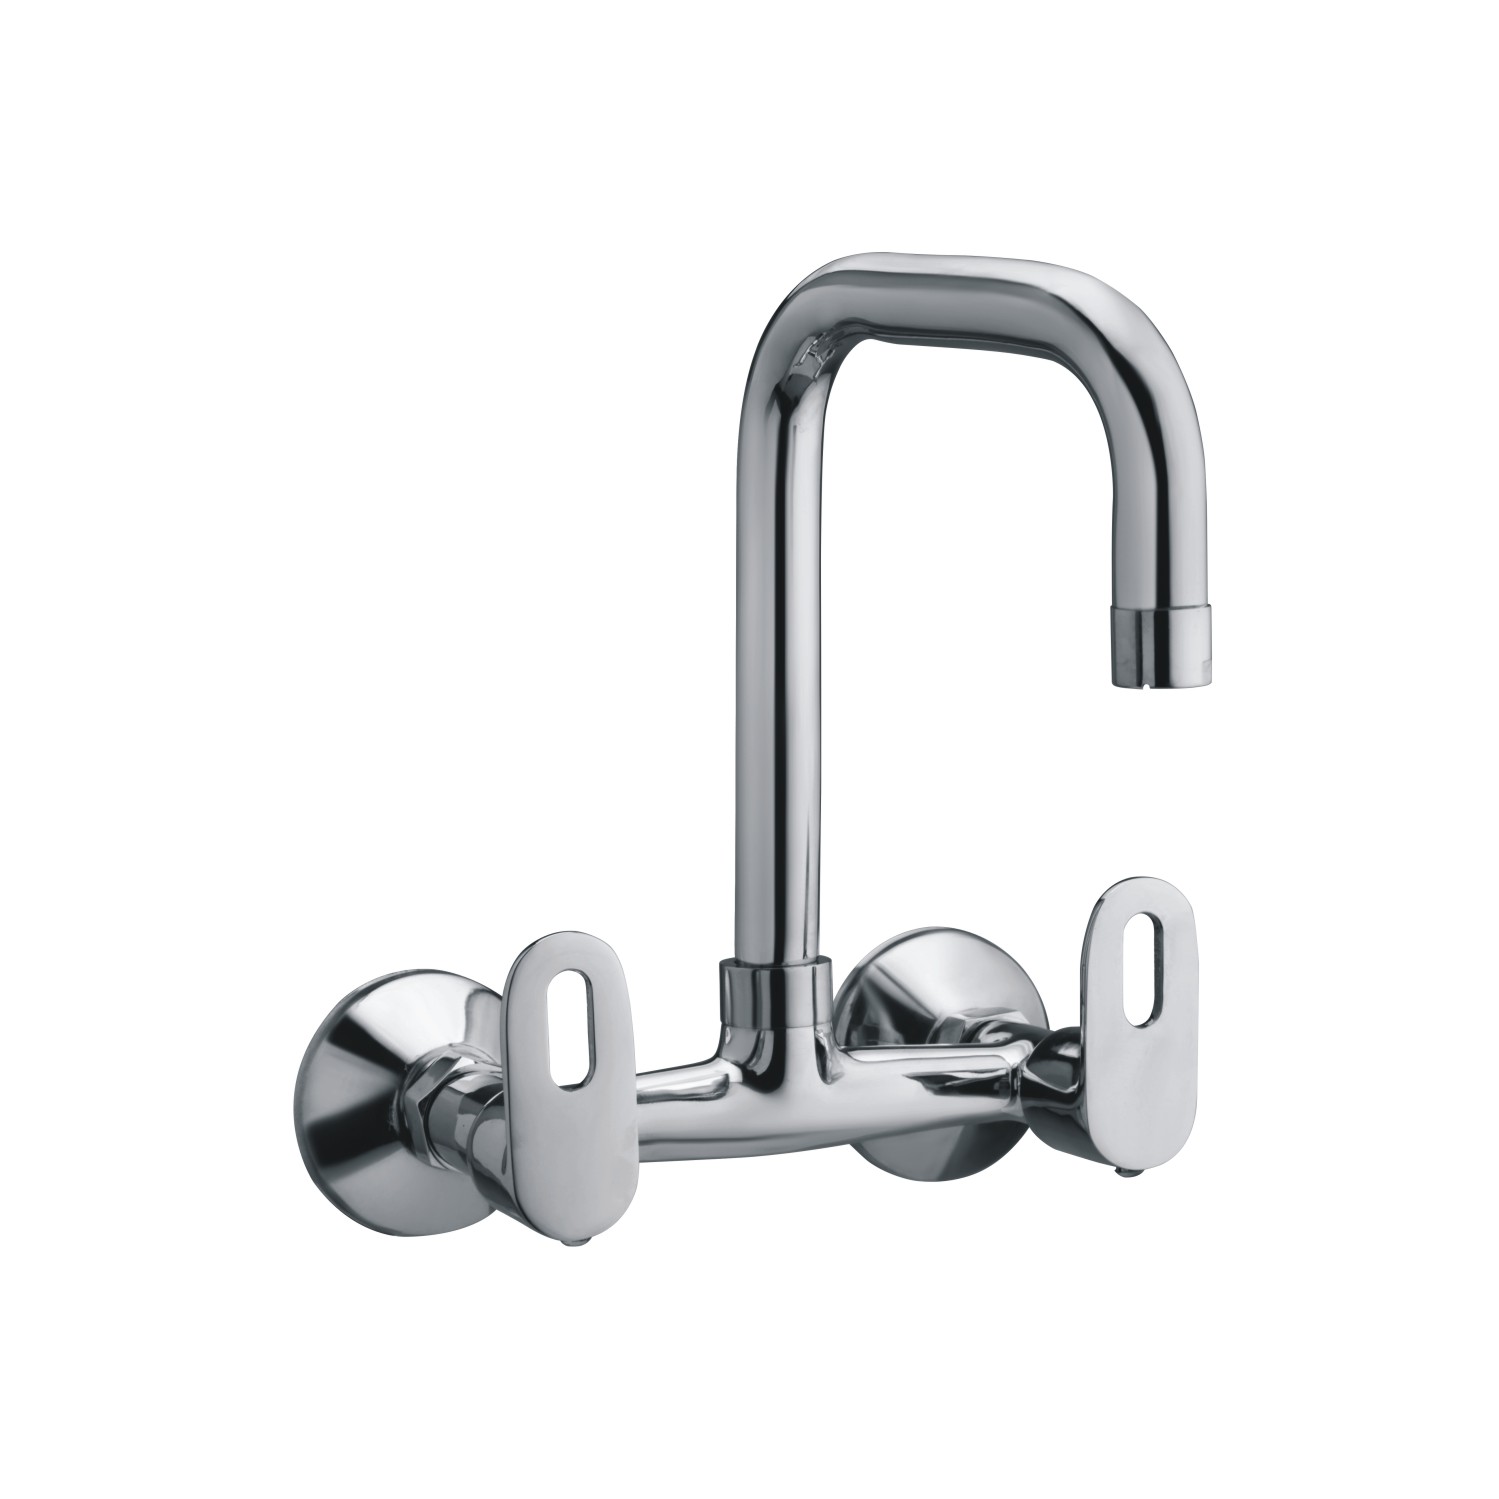 Nofo Sink Mixer with Swivel Spout